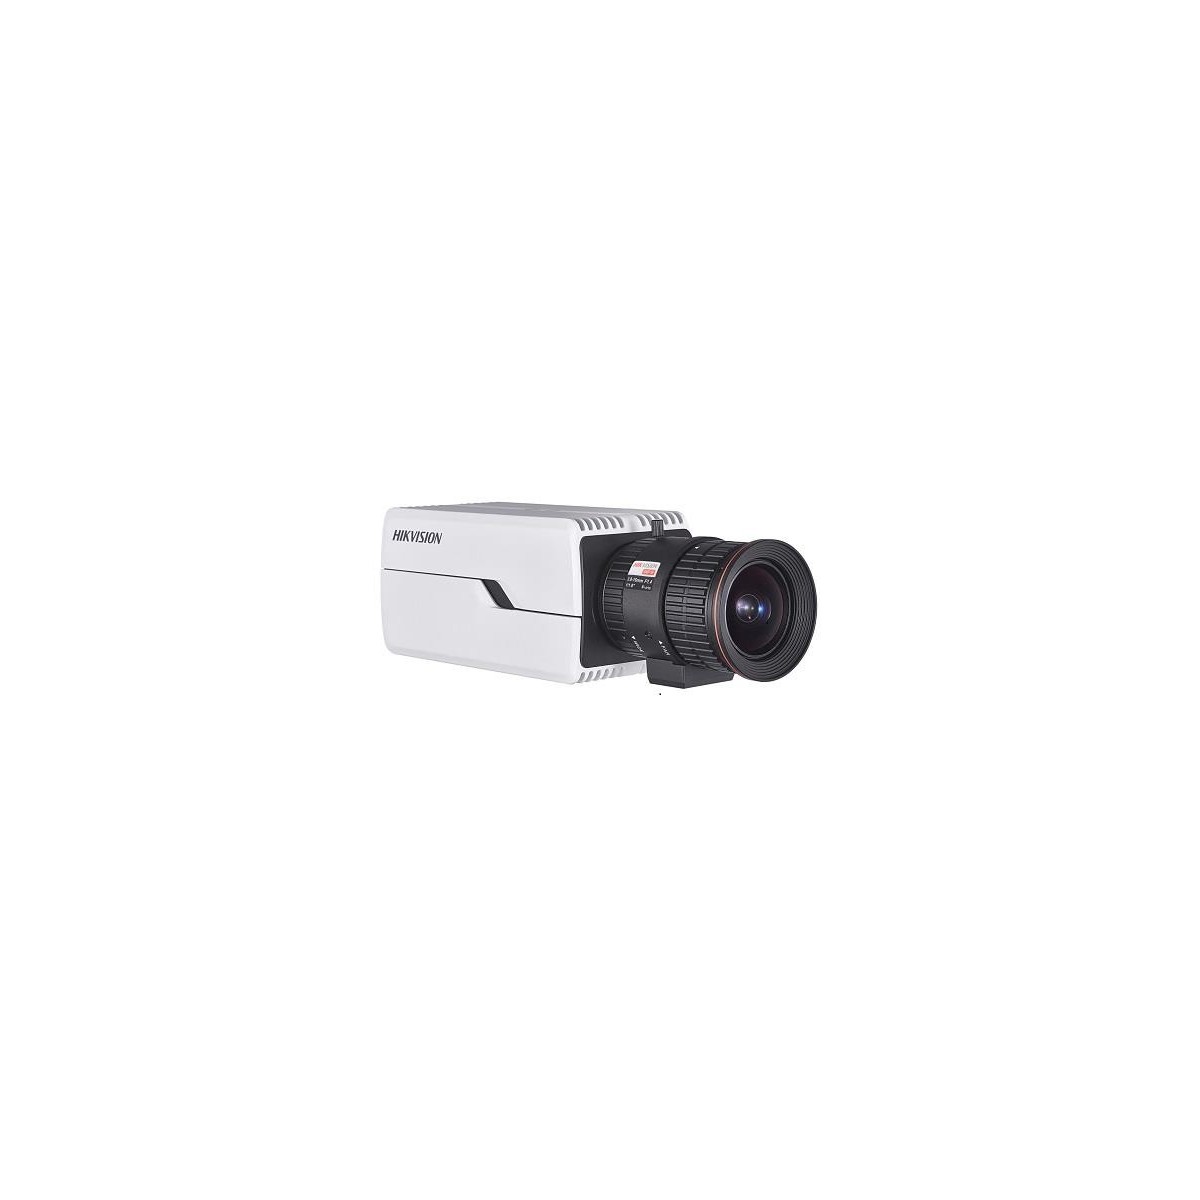 Hikvision Digital Technology DS-2CD7046G0-AP - IP security camera - Indoor - Wired - Box - Ceiling/Wall - Black,White